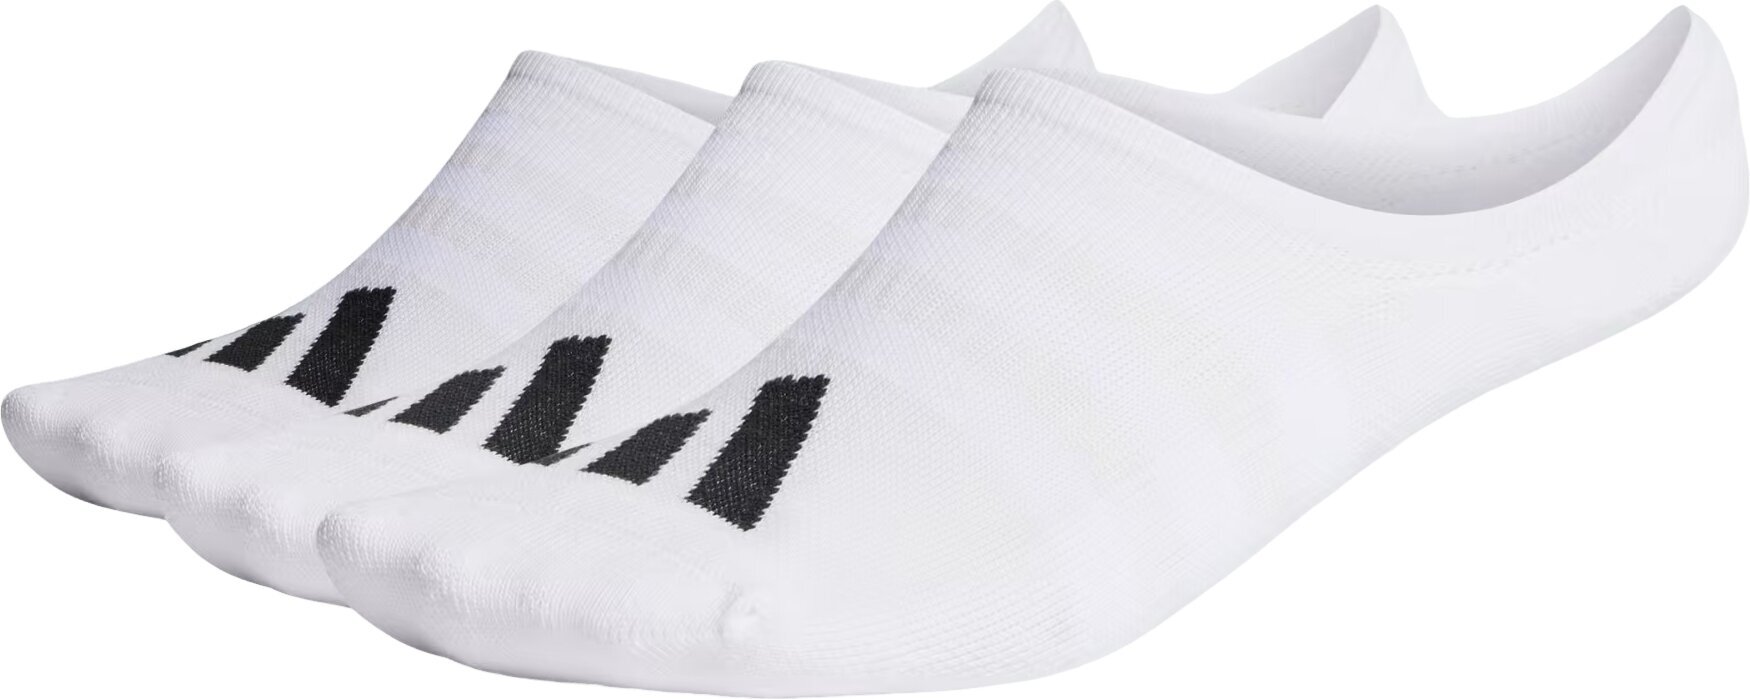 Calcetines Adidas No Show Golf Socks 3-Pairs Calcetines Blanco 48-51